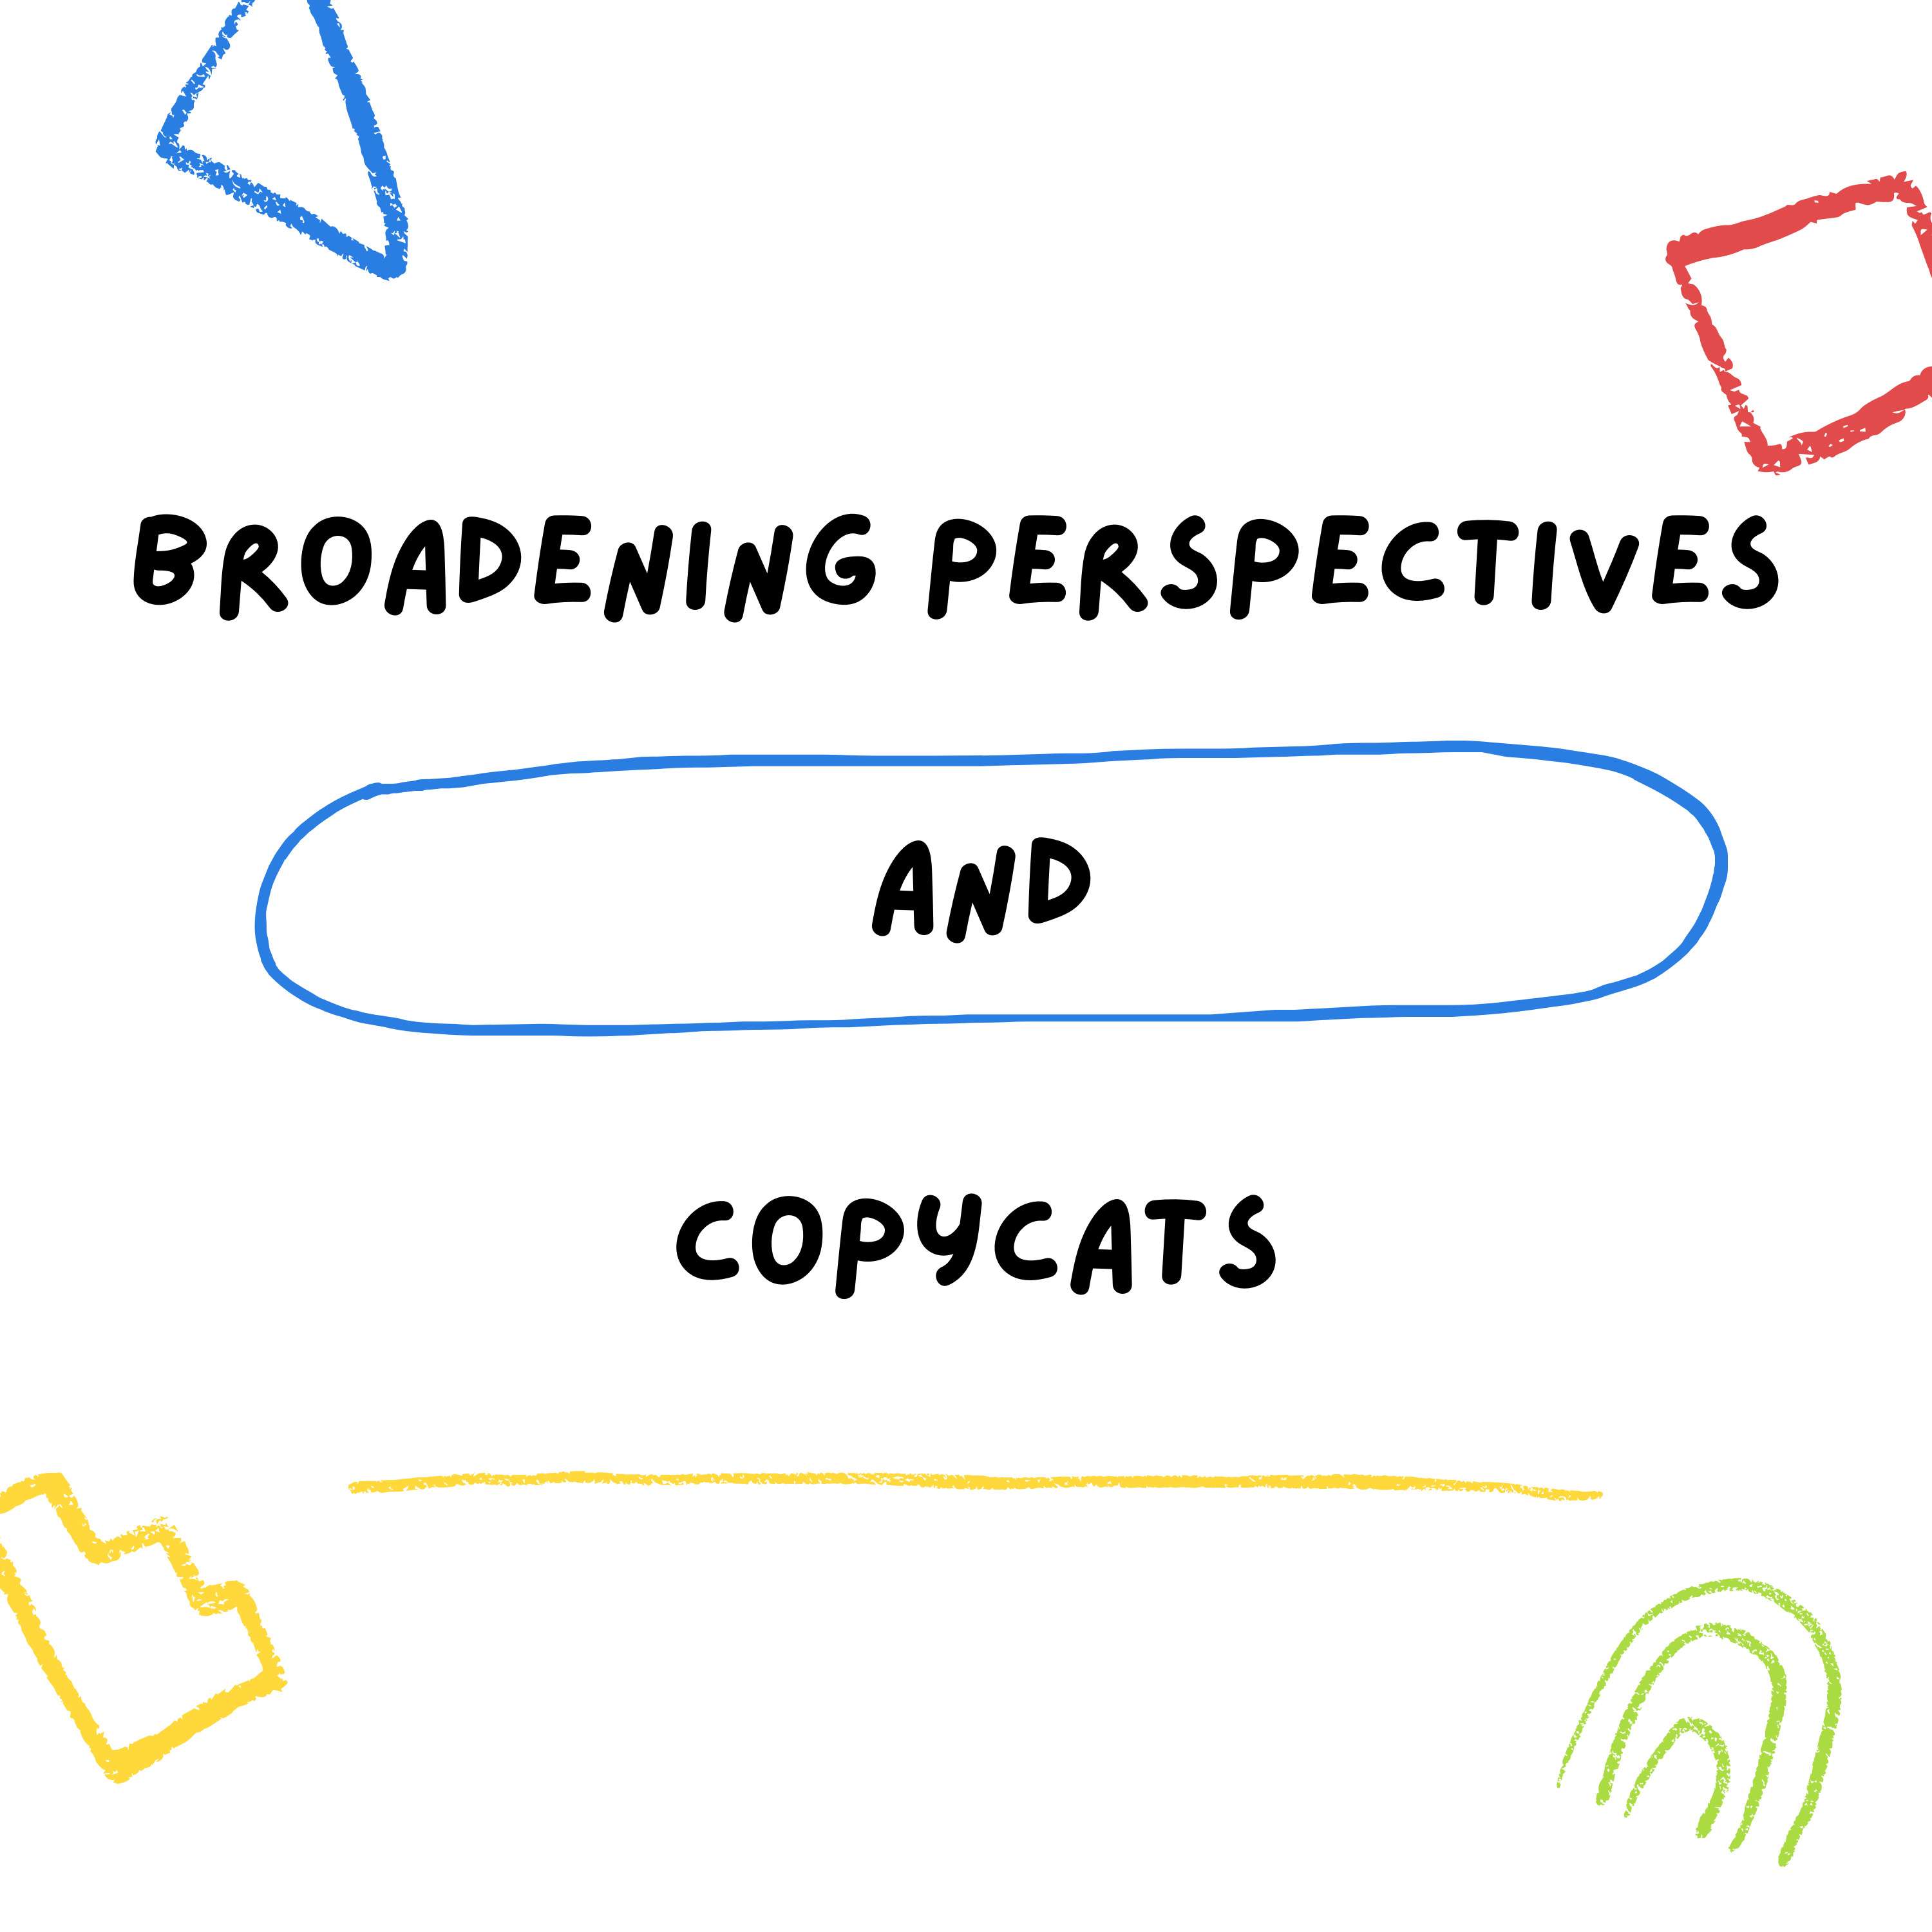 Broadening Perspectives and Copycats